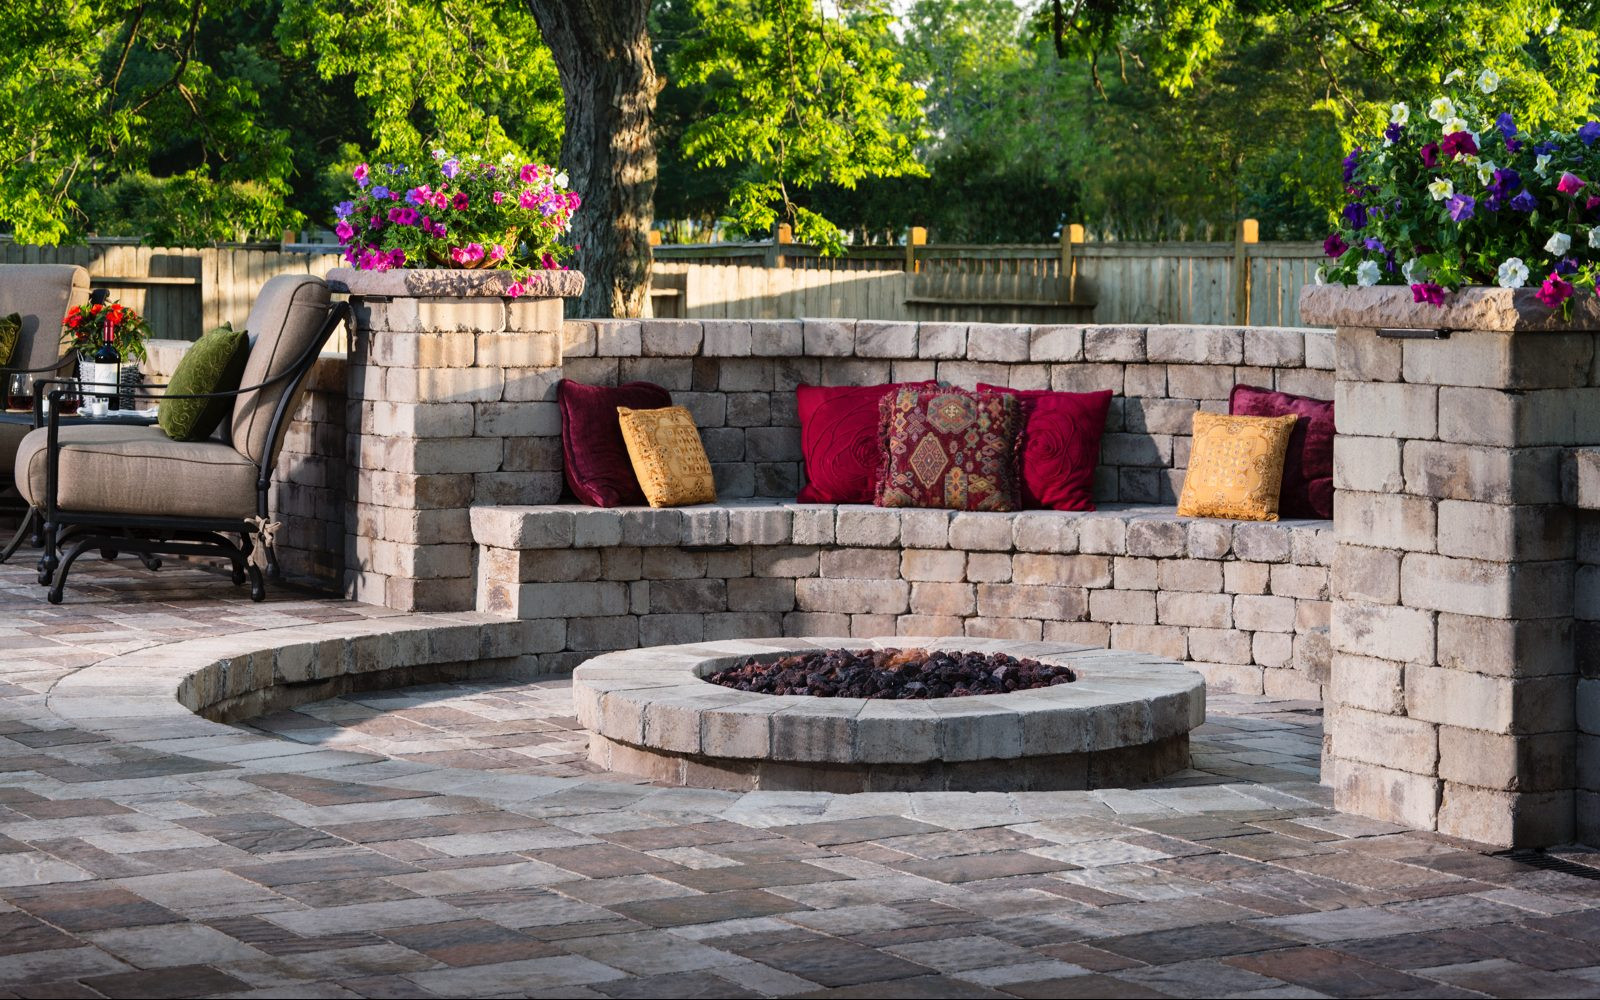 Small Patio With Fire Pit
 Turn Up the Heat with These Cozy Fire Pit Patio Design